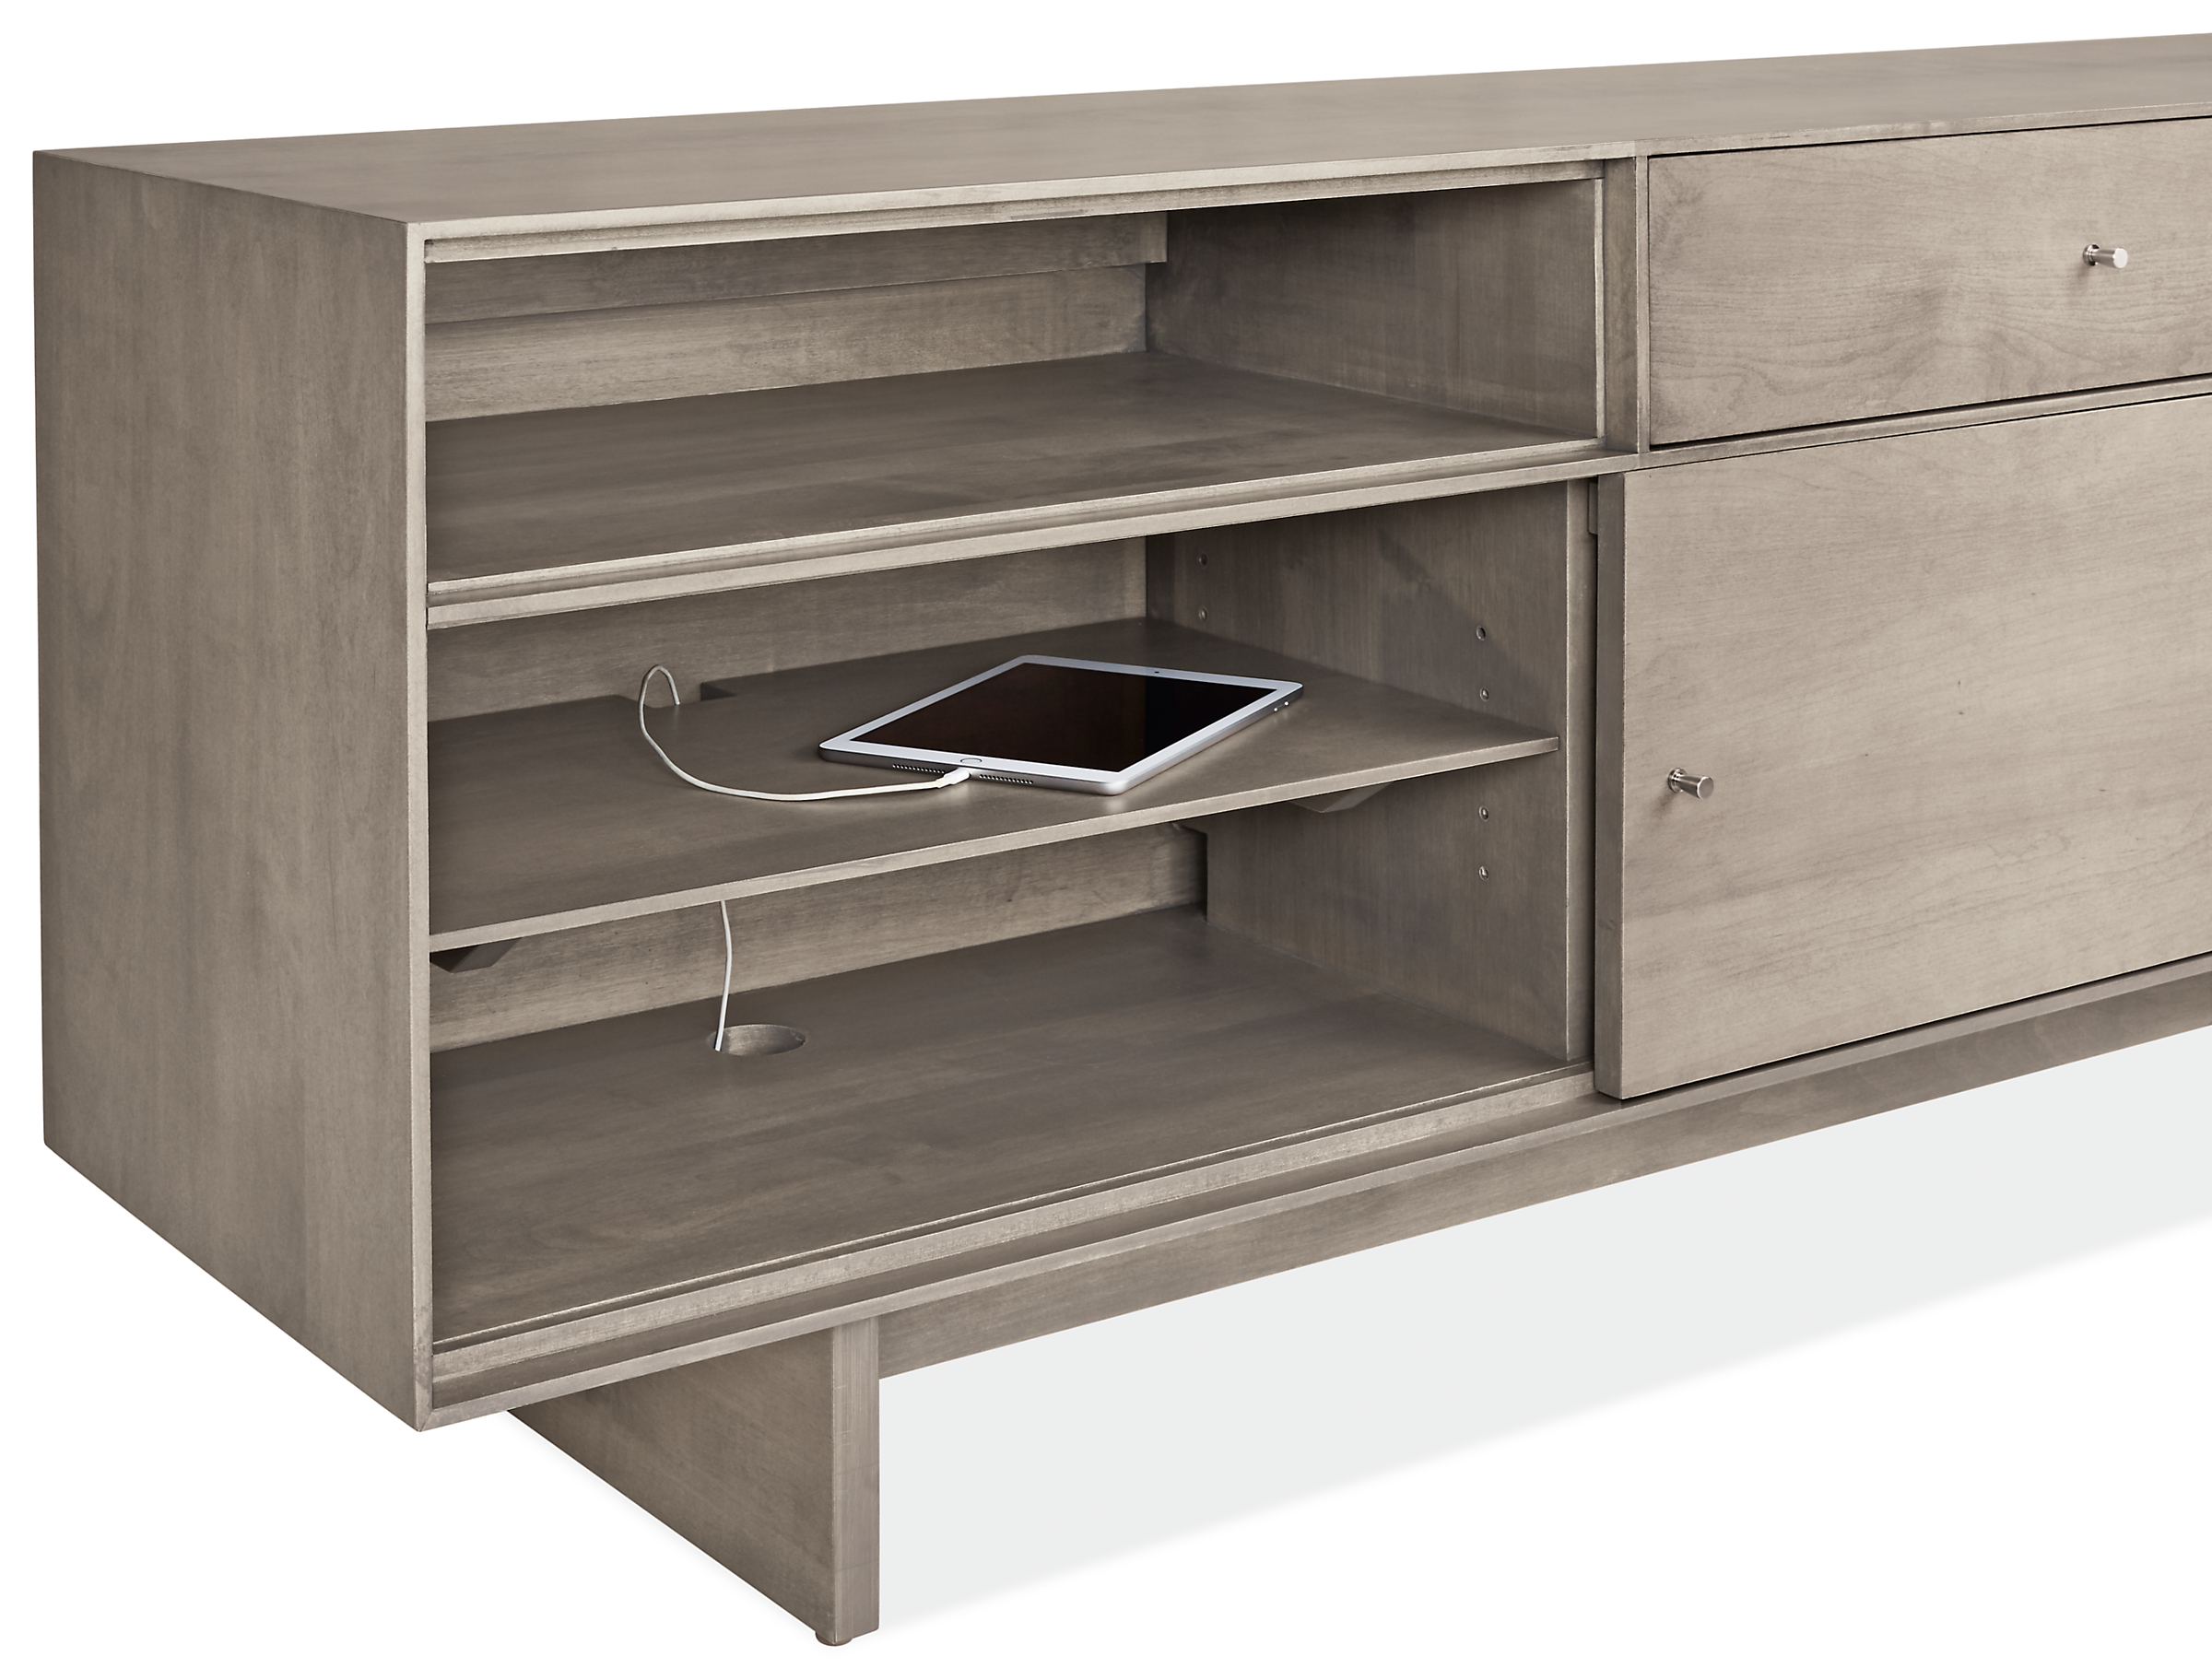 Detail of Hudson right-file drawer bench with tablet plugged into cabinet cord opening.